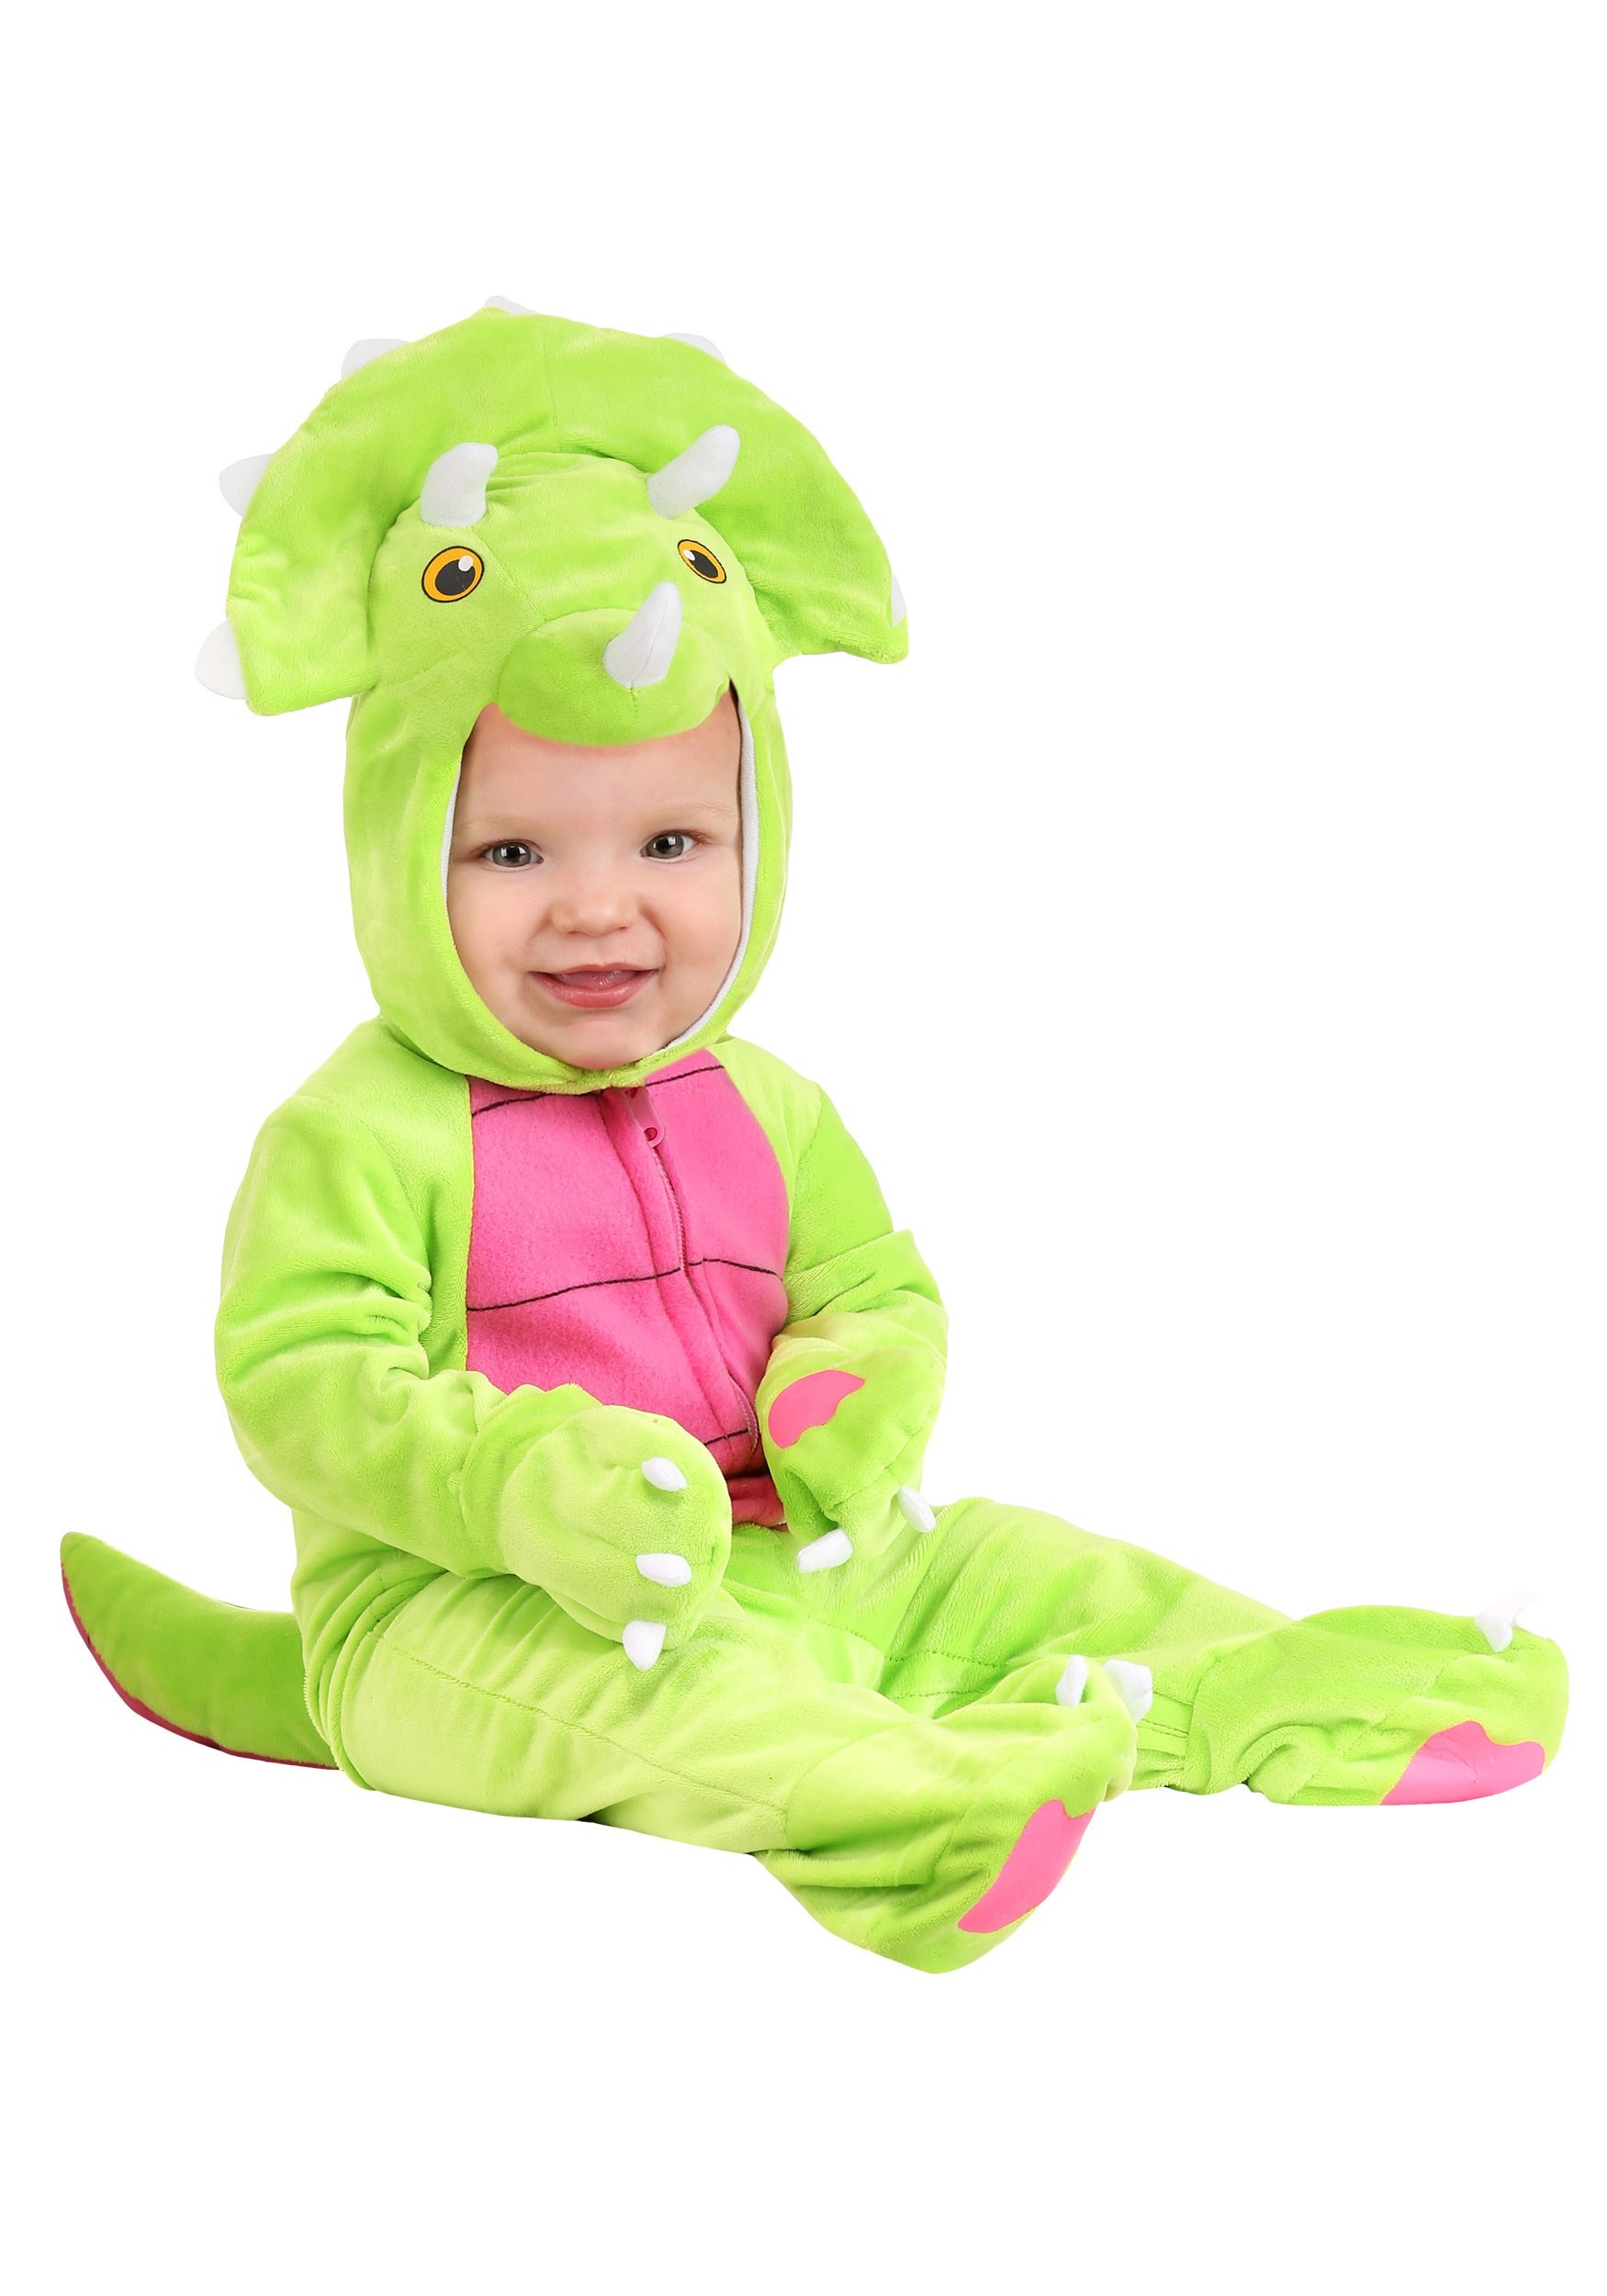 Photos - Fancy Dress FUN Costumes Tiny Triceratops Costume for Infants Green/Pink/White